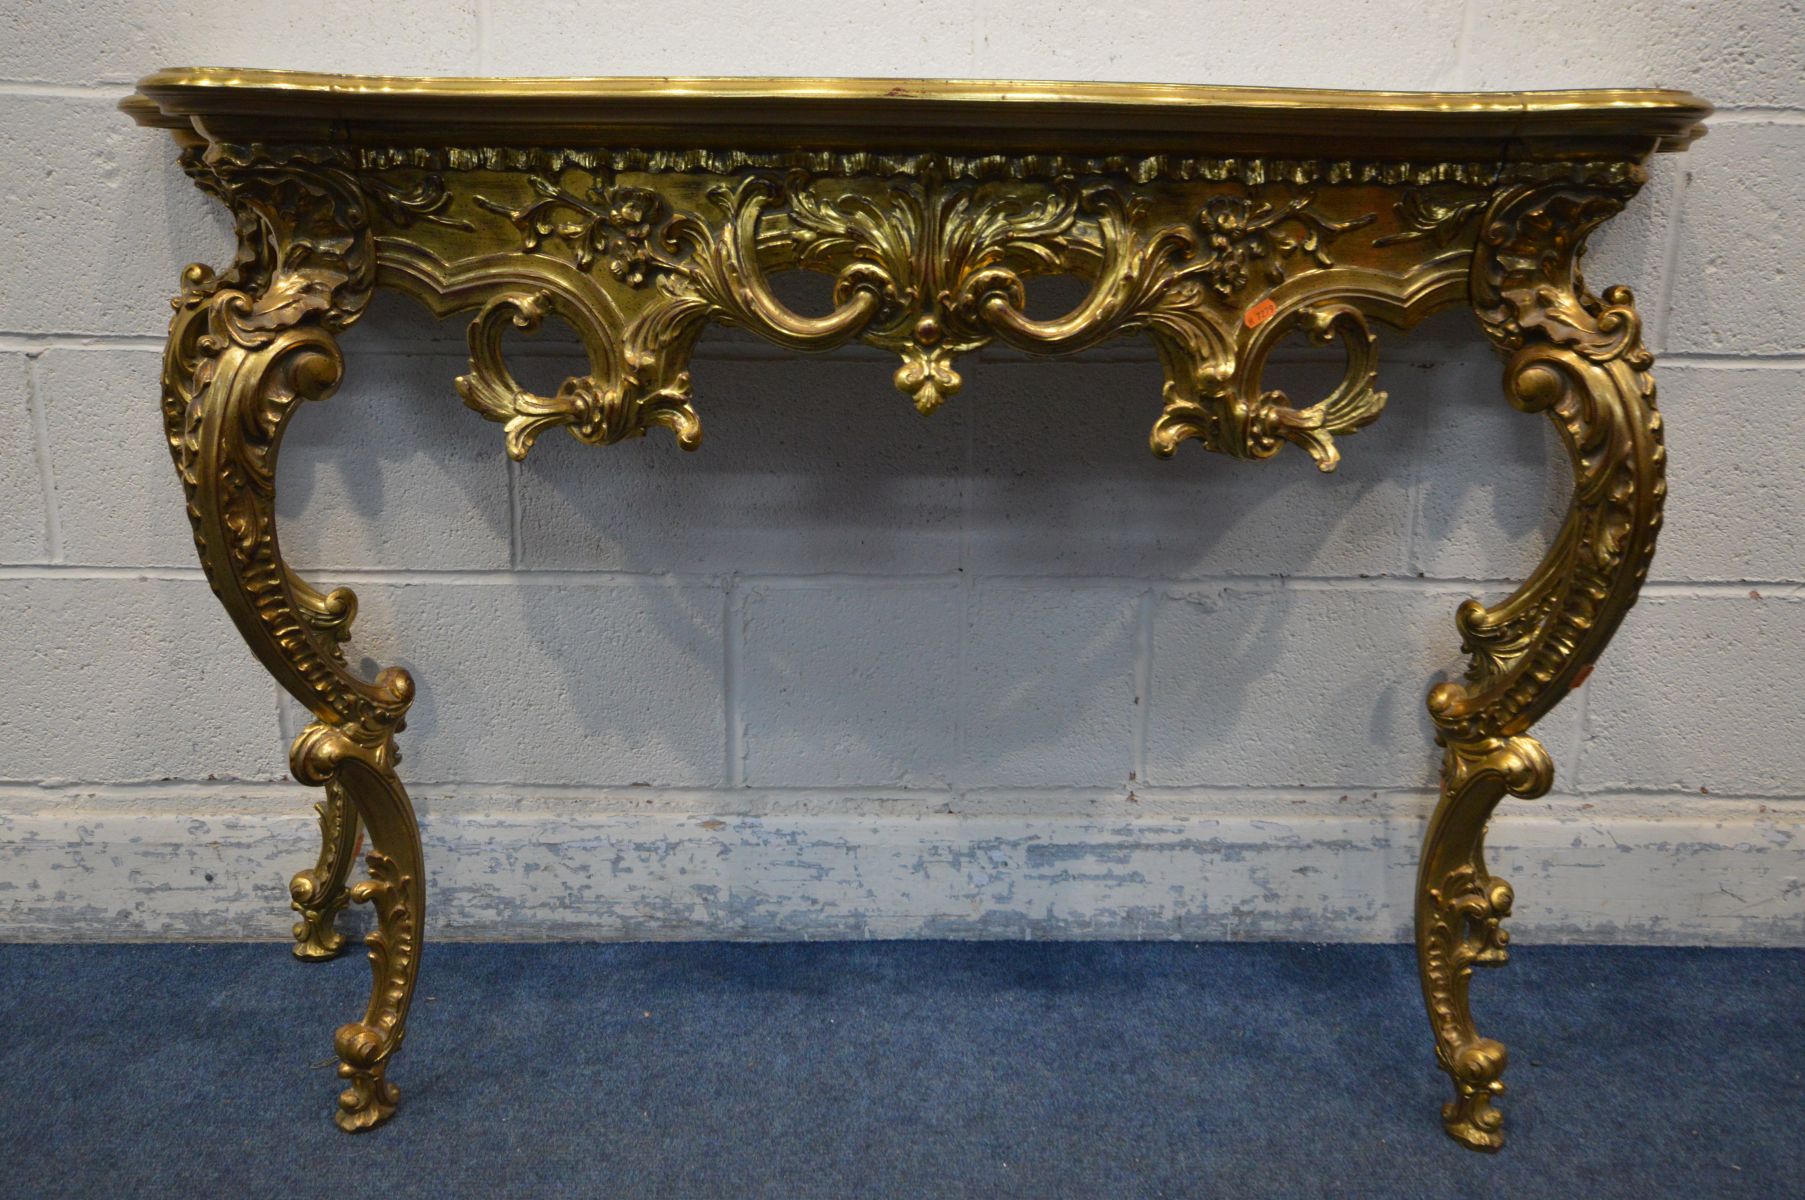 A LATE 20TH CENTURY GILTWOOD FRENCH STYLE HALL TABLE, with a decorated mirror top on four legs, - Image 3 of 4